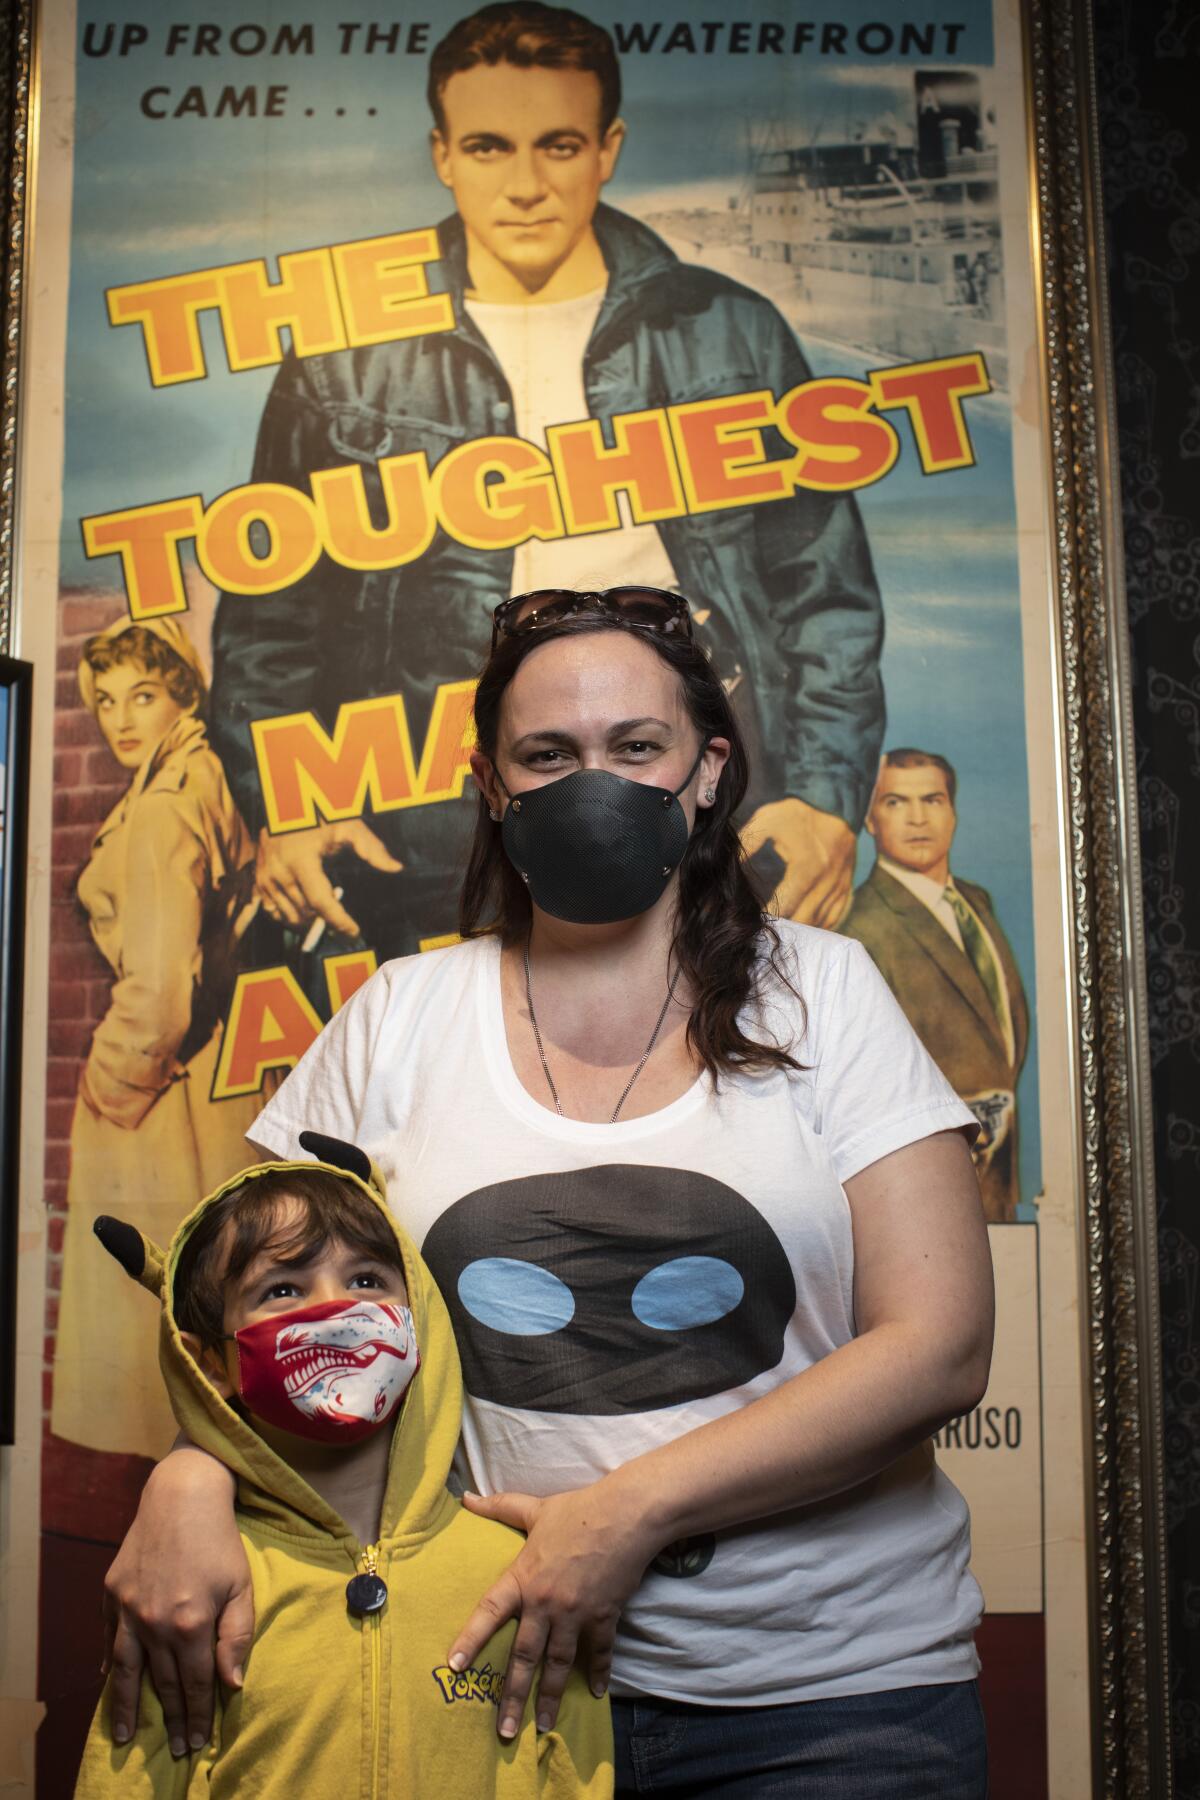 A woman and a young boy in a yellow hoodie stand in front of a movie poster.